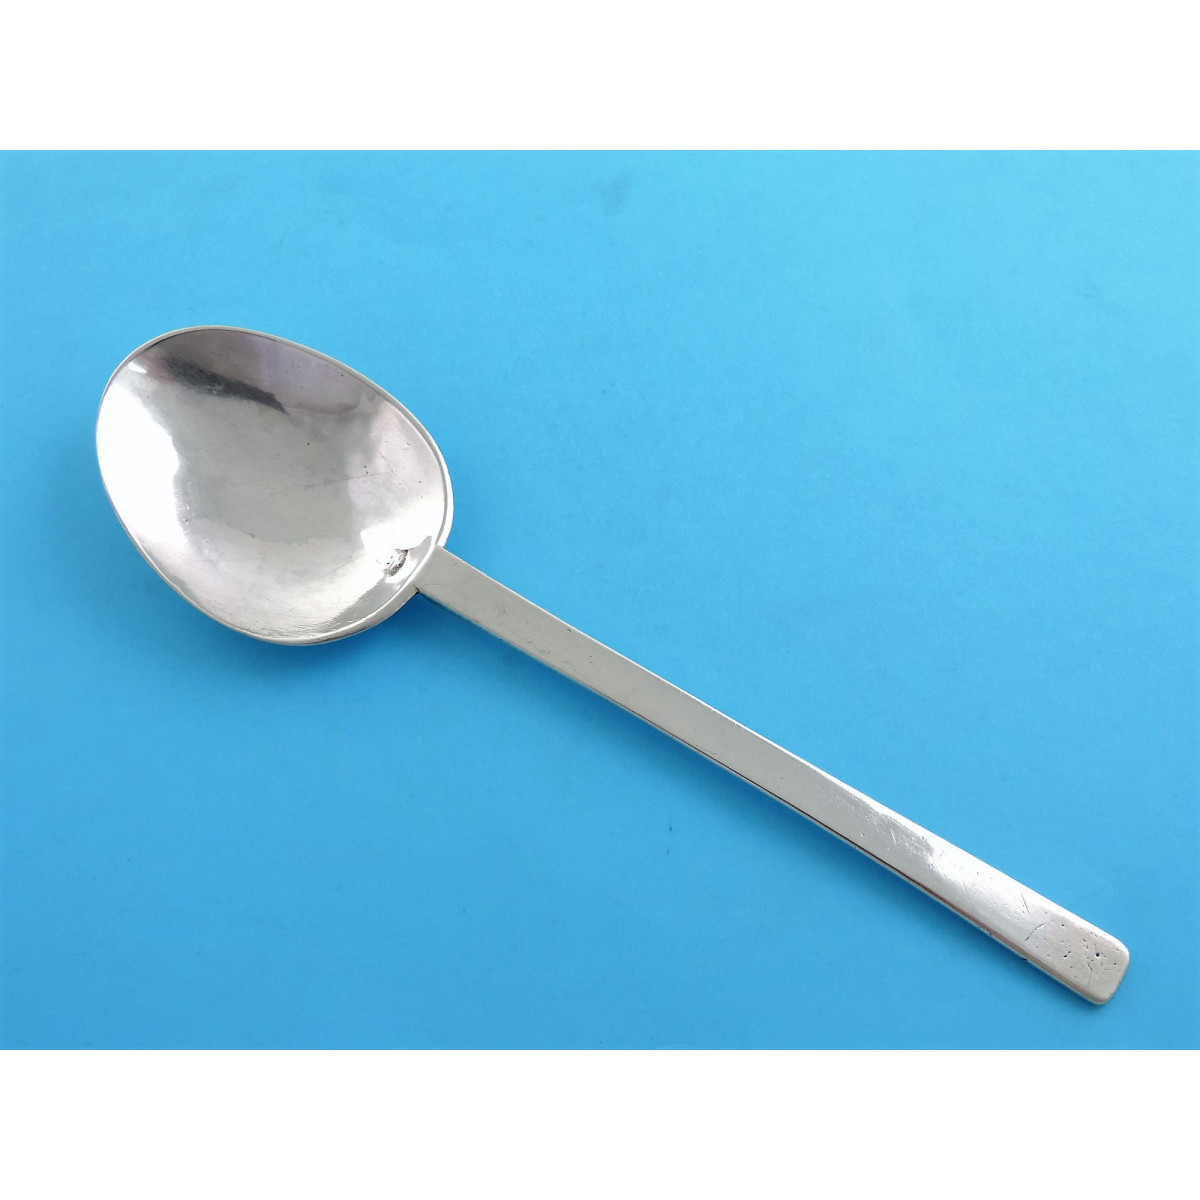 Puritan Spoon, 1664 by Jeremy Johnson » Antique Silver Spoons